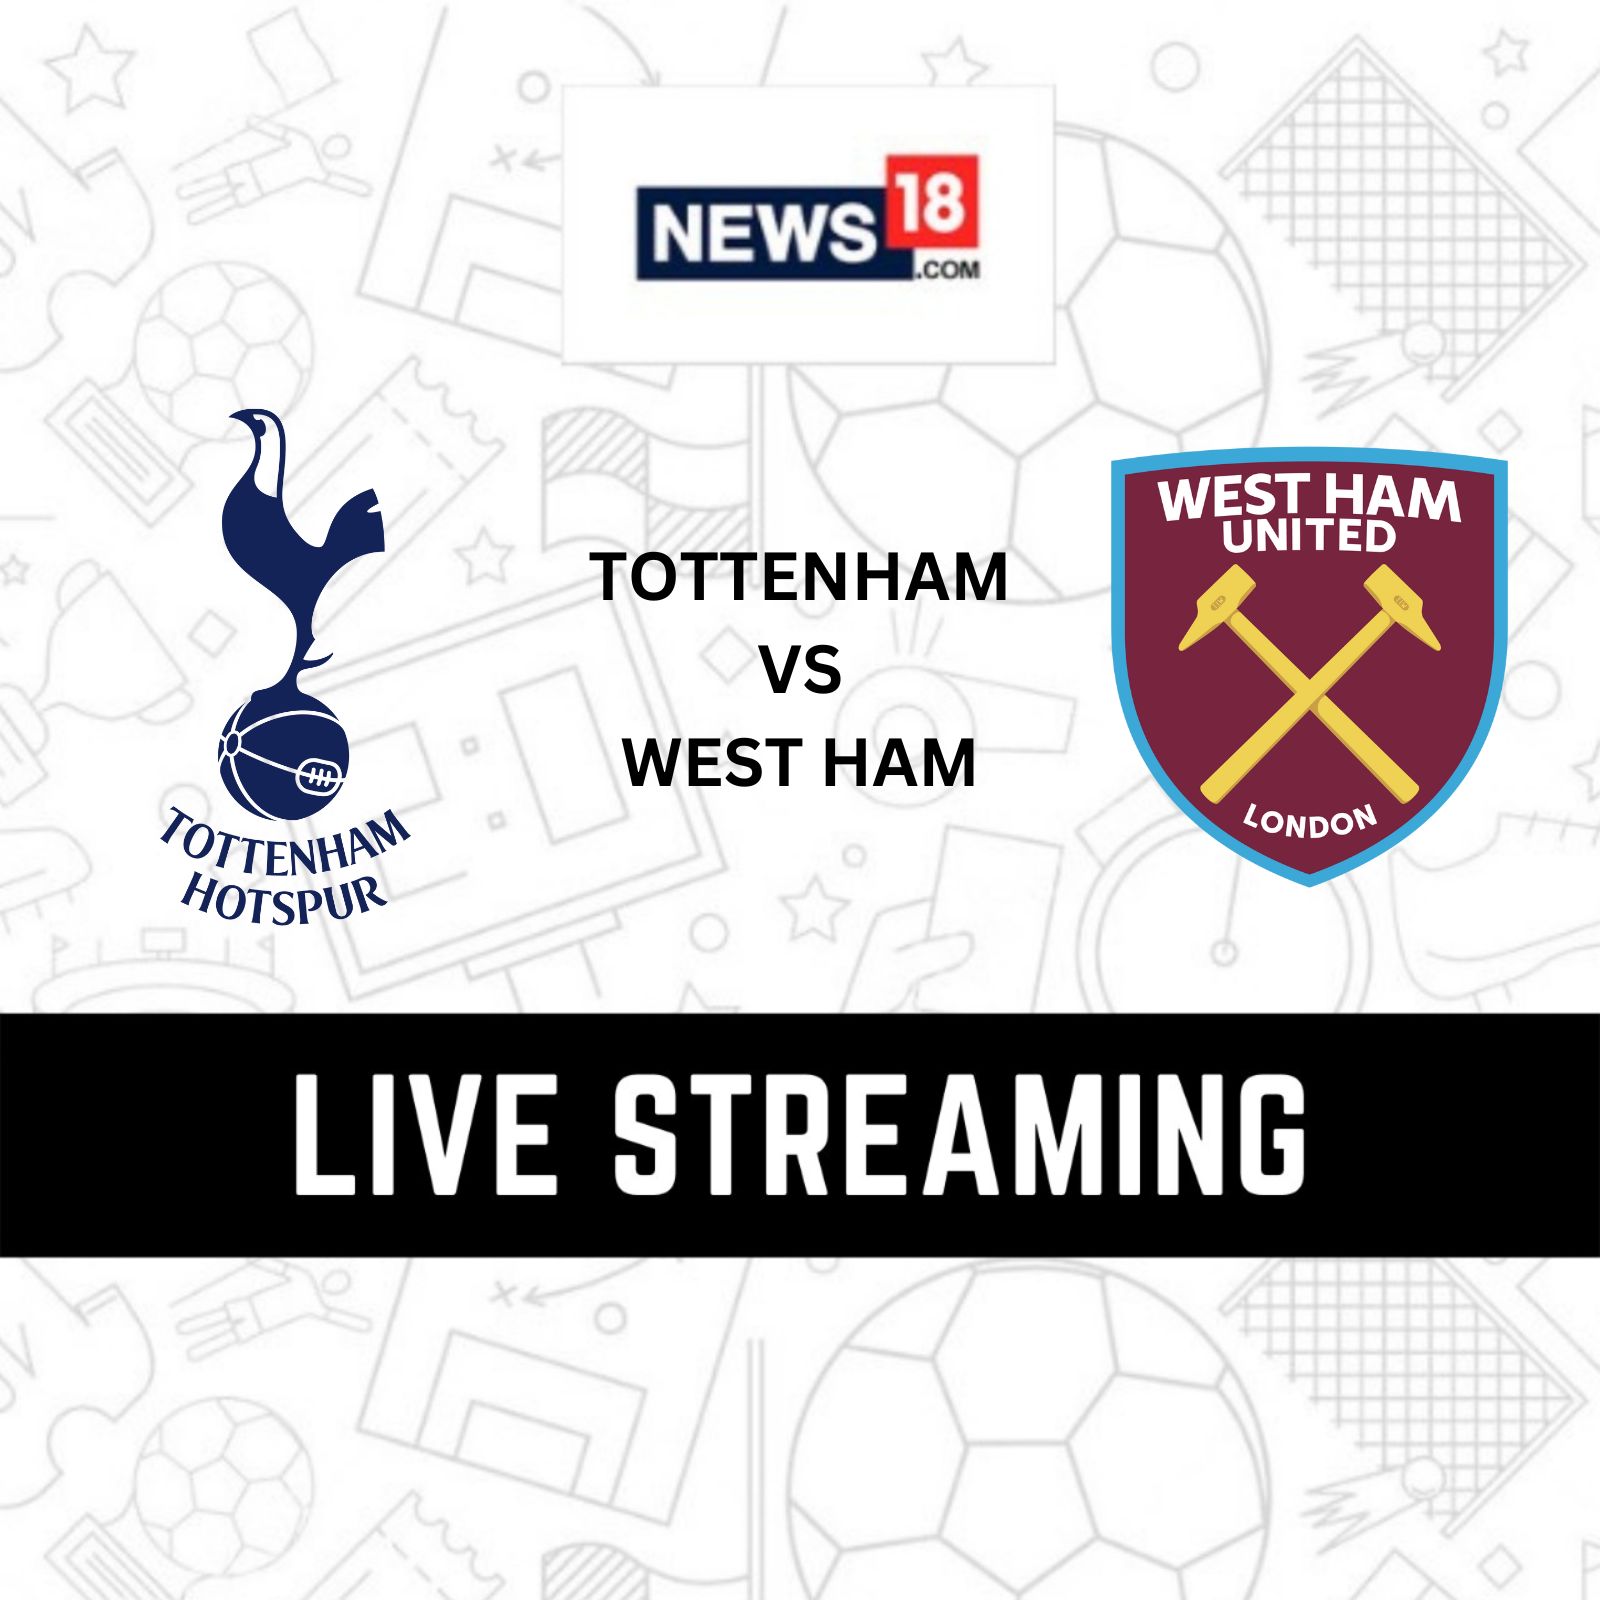 Tottenham vs West Ham United Live Streaming When and Where to Watch Premier League Live Coverage on Live TV Online